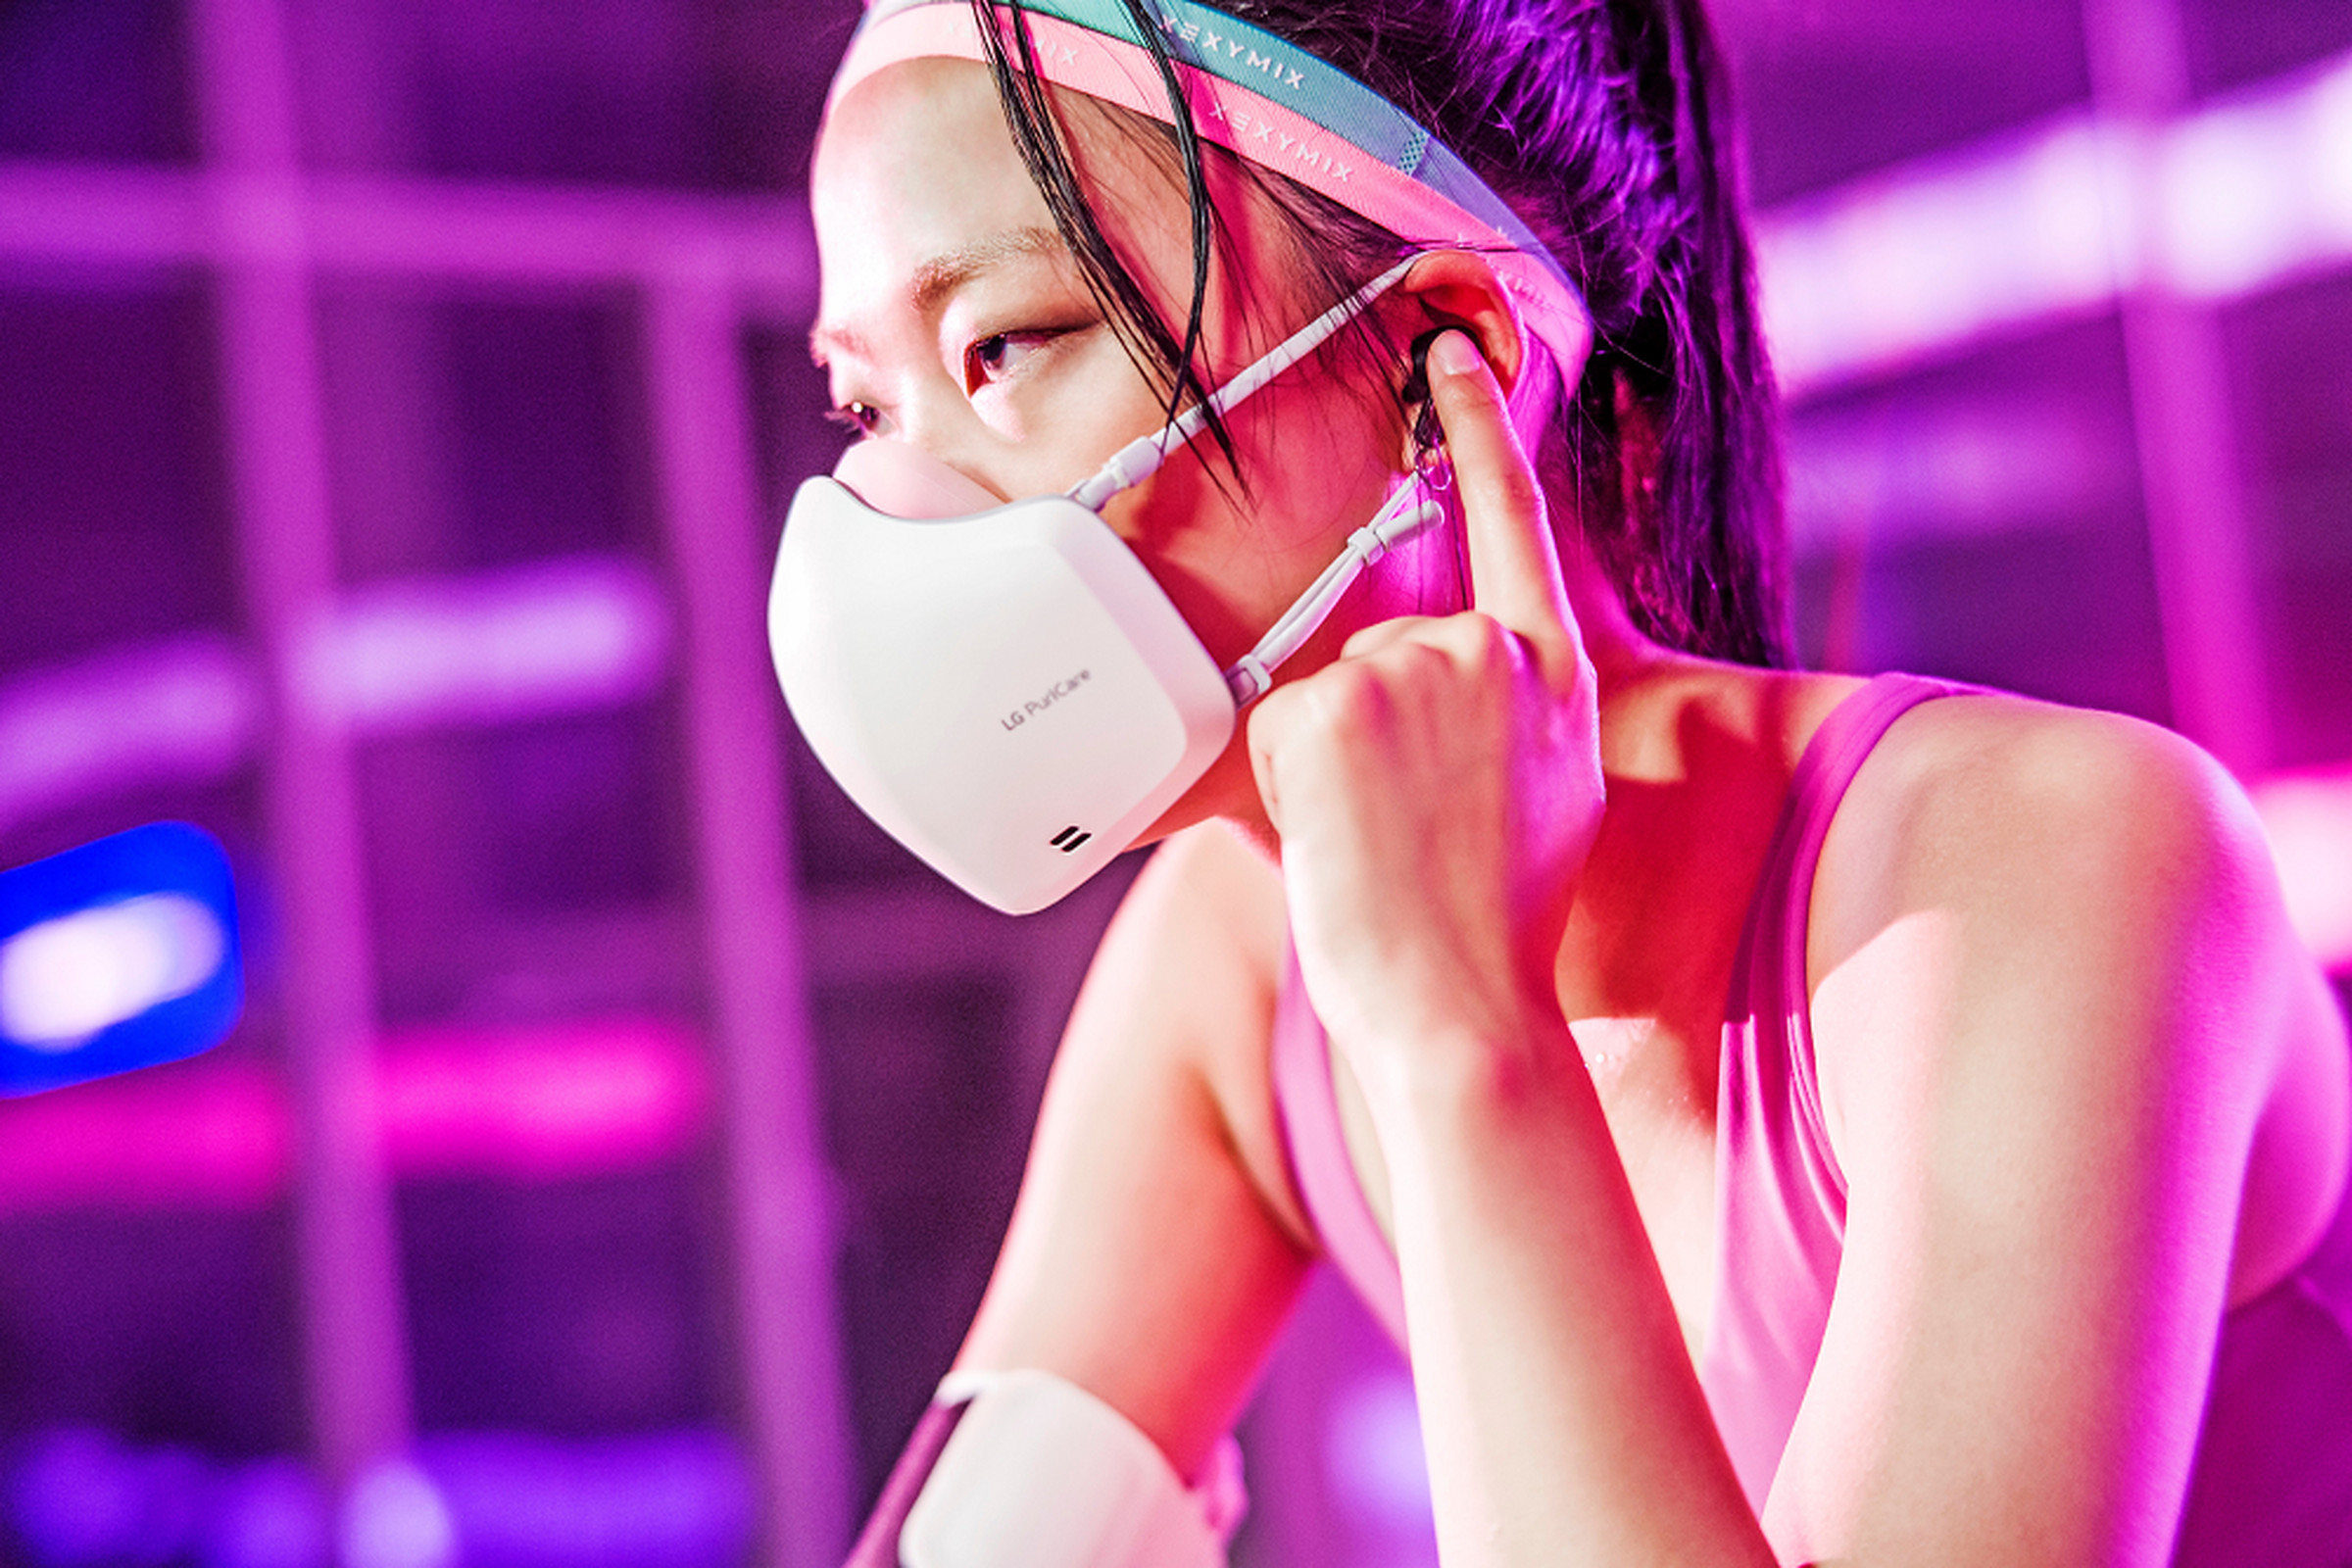 LG claims the battery-powered, air-filtering mask is comfortable to wear for up to eight hours at a time.